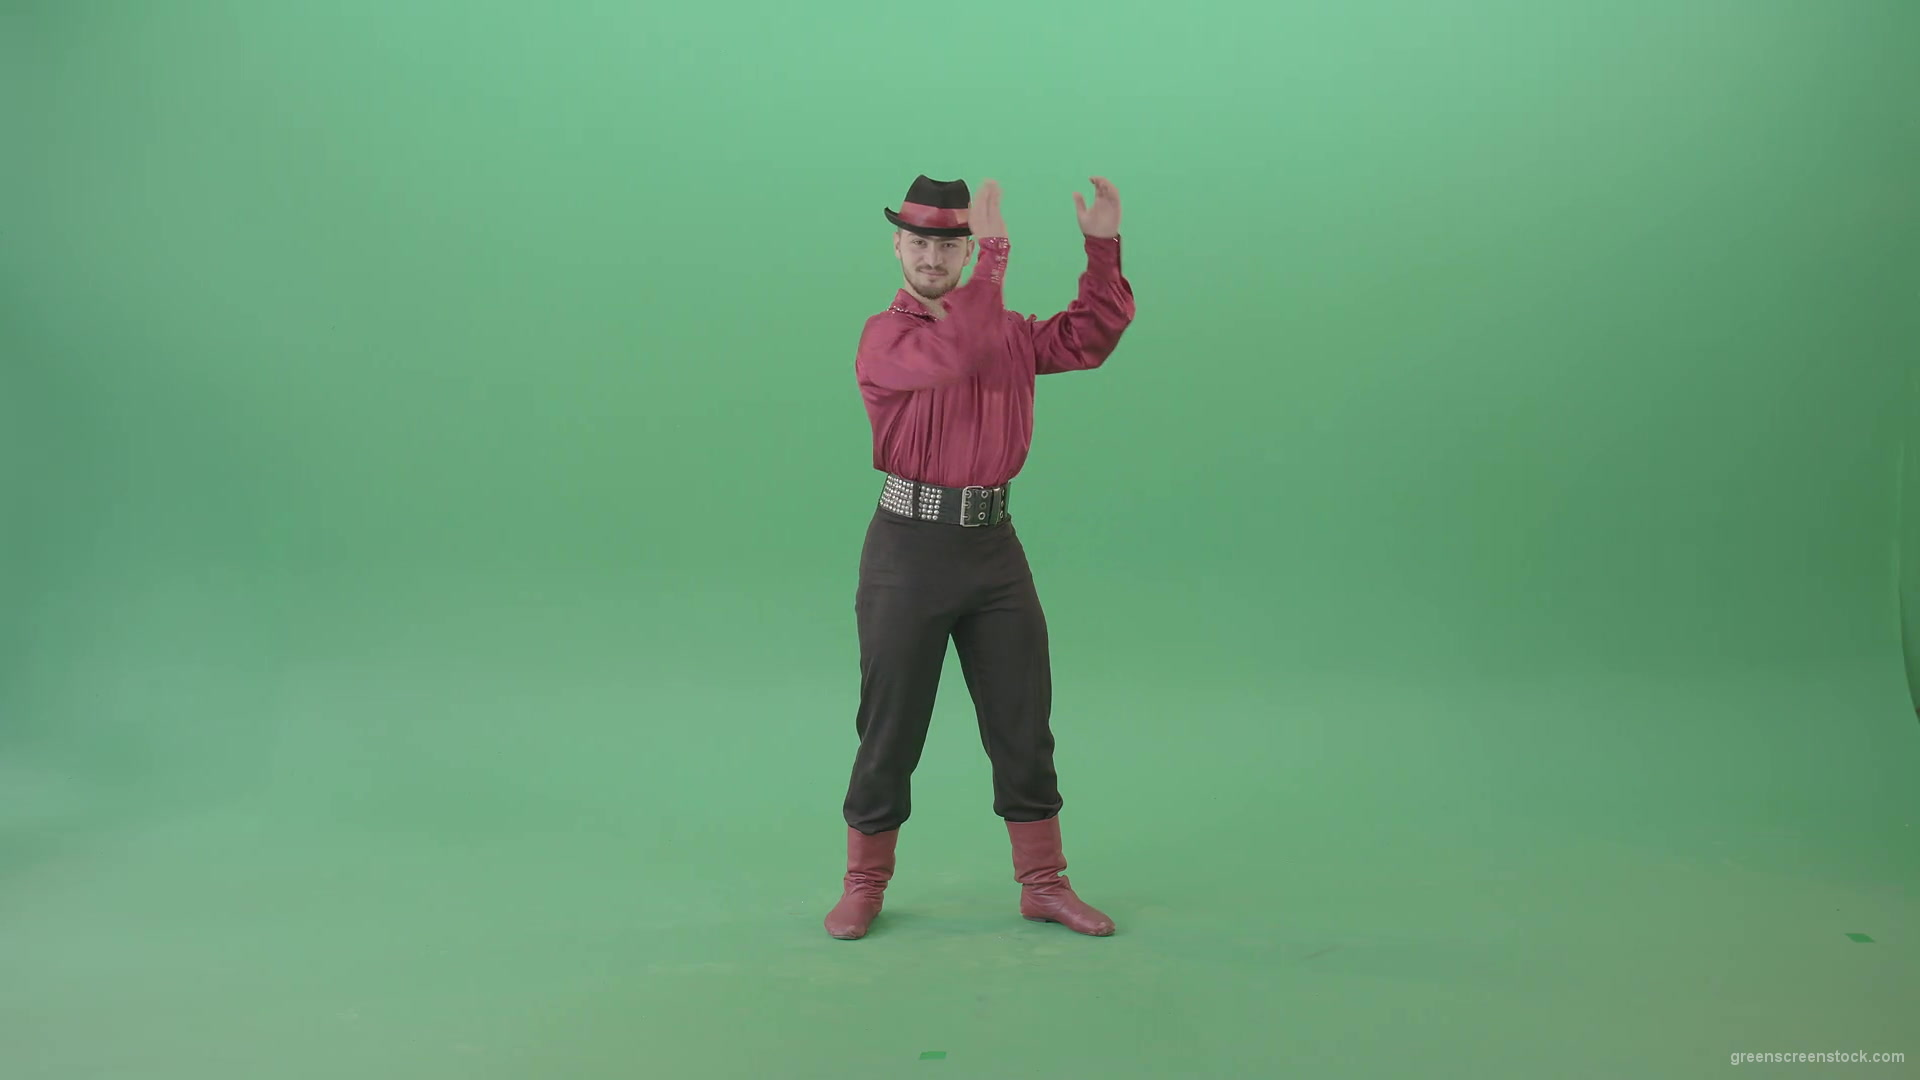 Modovian-Balkan-Gipsy-man-clapping-hands-isolalated-on-green-screen-4K-Video-Footage-1920_002 Green Screen Stock